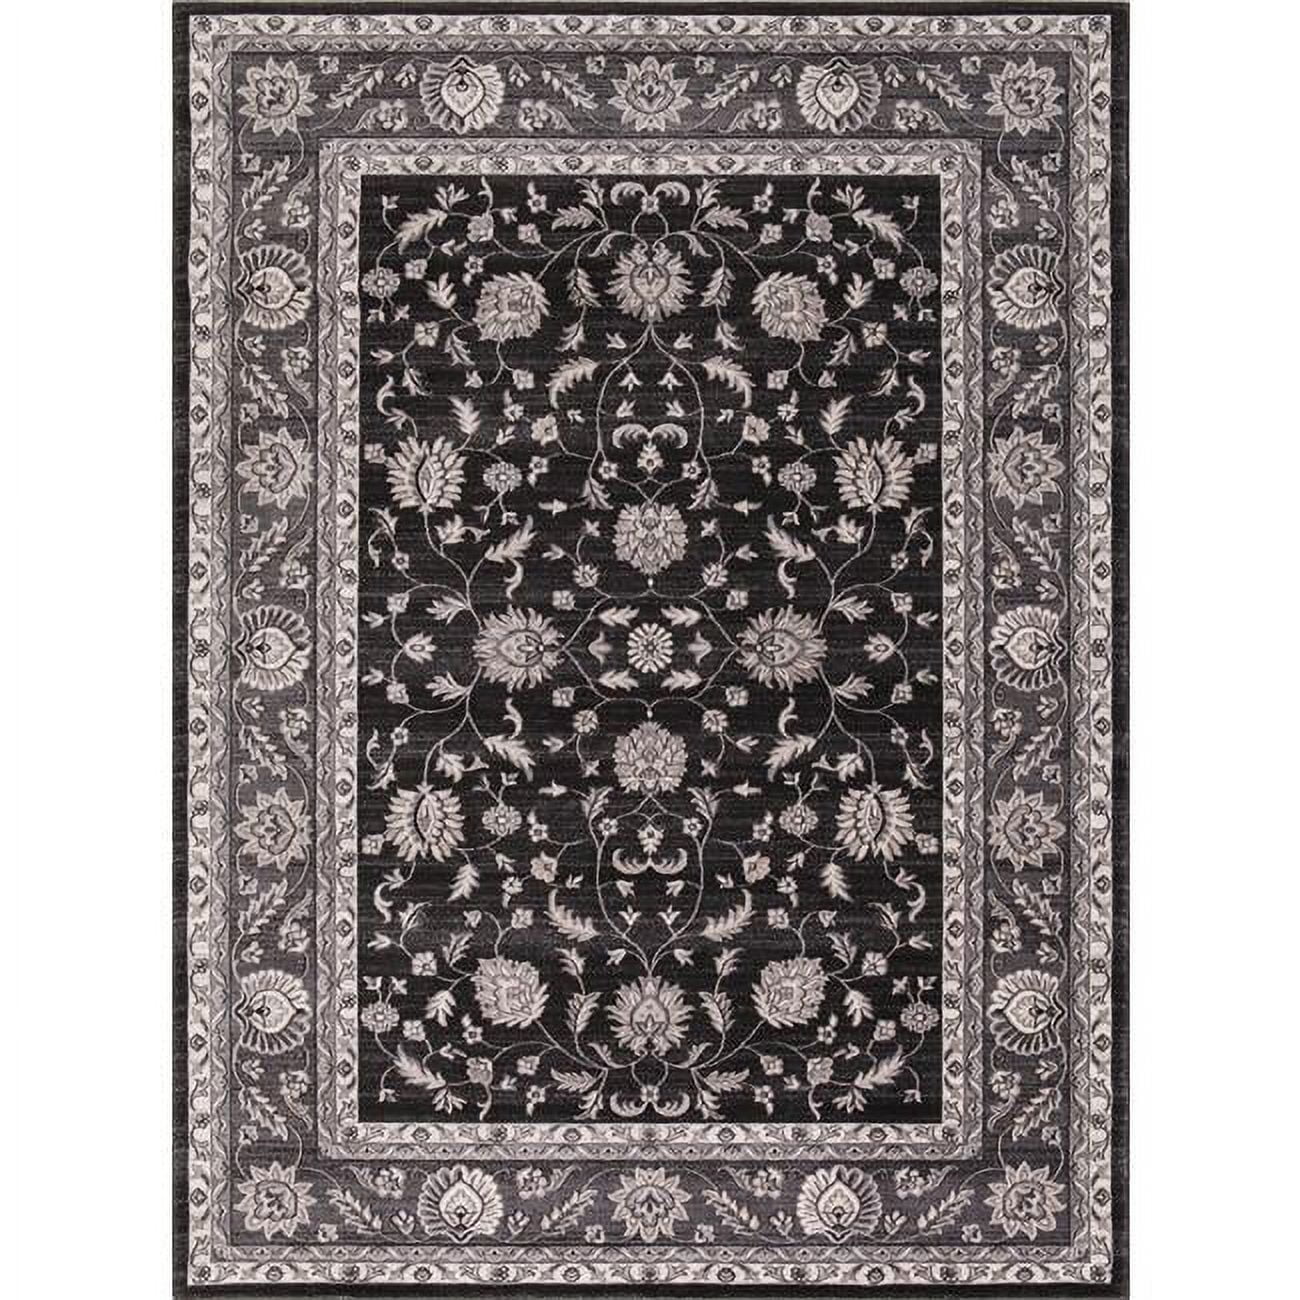 Concord Global 28235 5 Ft. 3 In. X 7 Ft. 3 In. Kashan Mahal - Anthracite